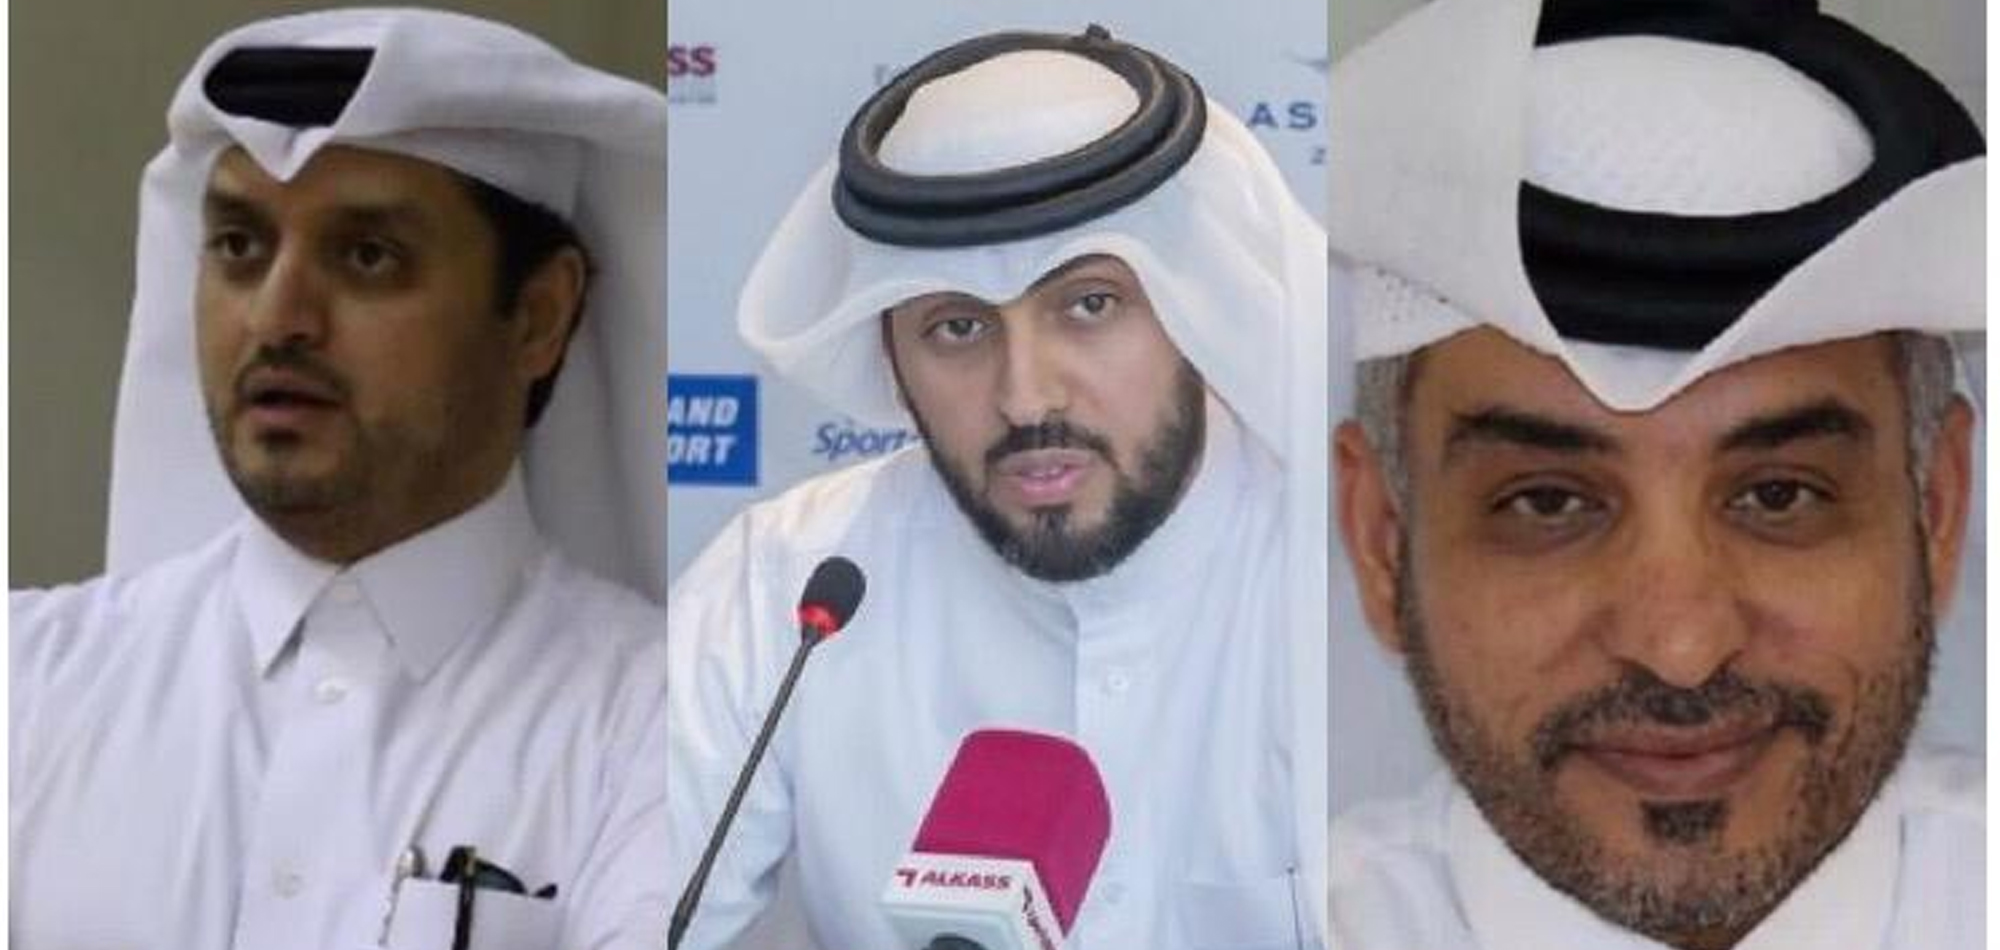 Three Qatari members within the working committees of the AVC Volleyball Federation